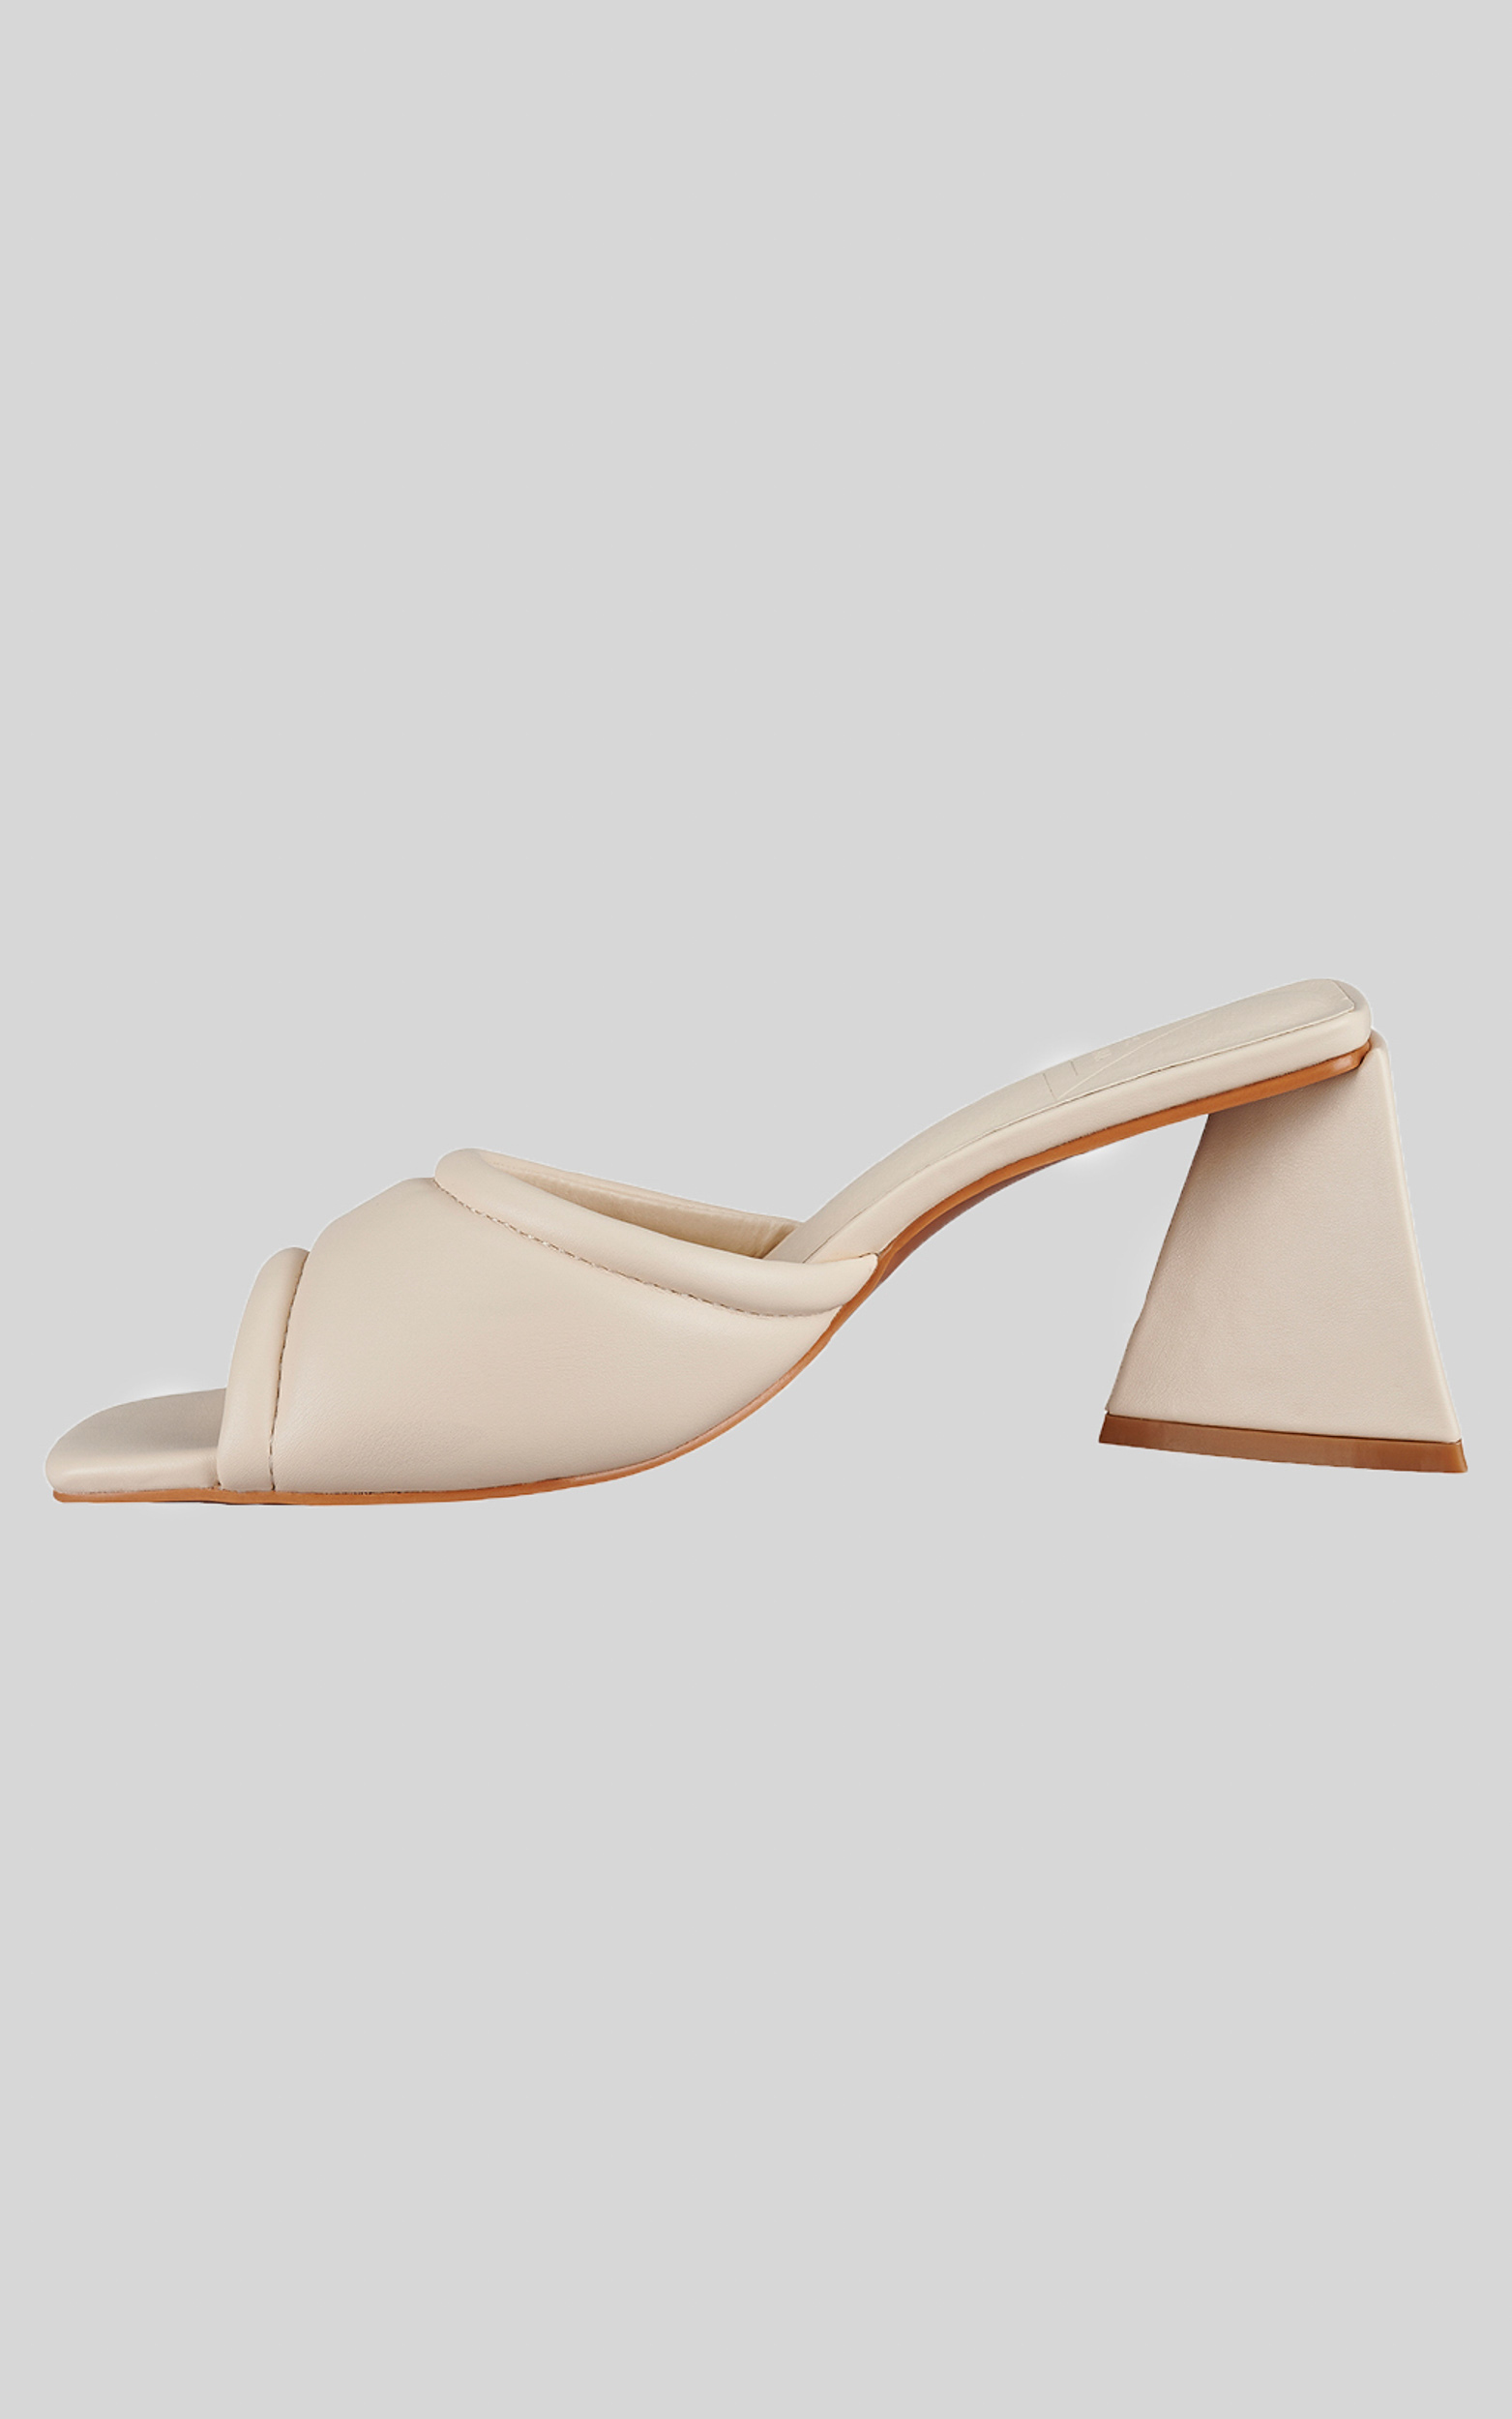 St Sana - Tycho Mule Heels in Off White - 05, WHT2, hi-res image number null